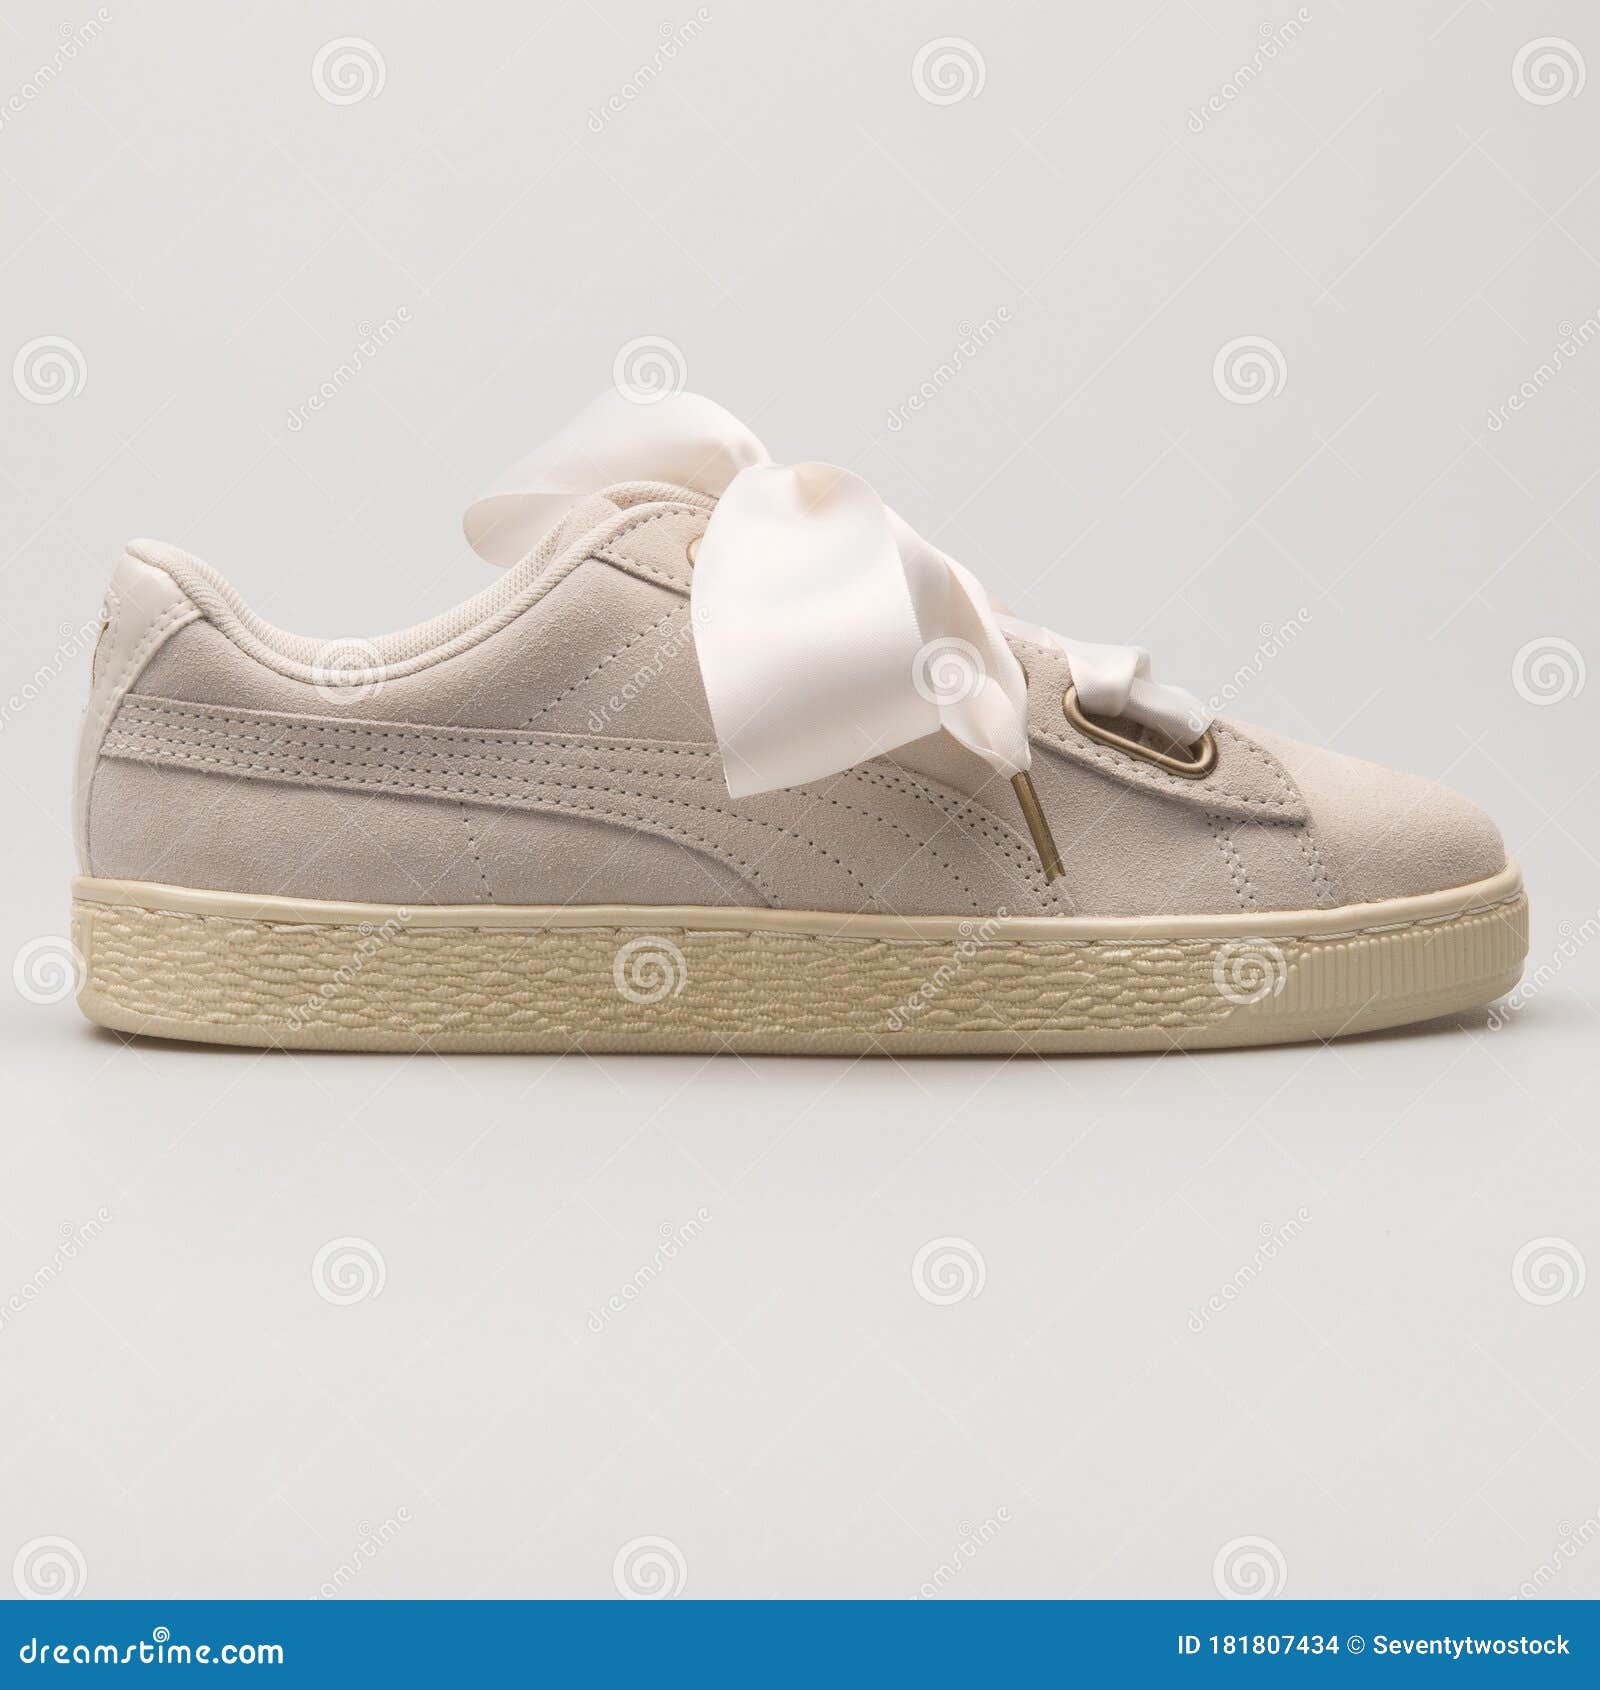 Puma Suede Heart Satin Beige Sneaker Editorial Stock Image - Image of isolated, gold: 181807434